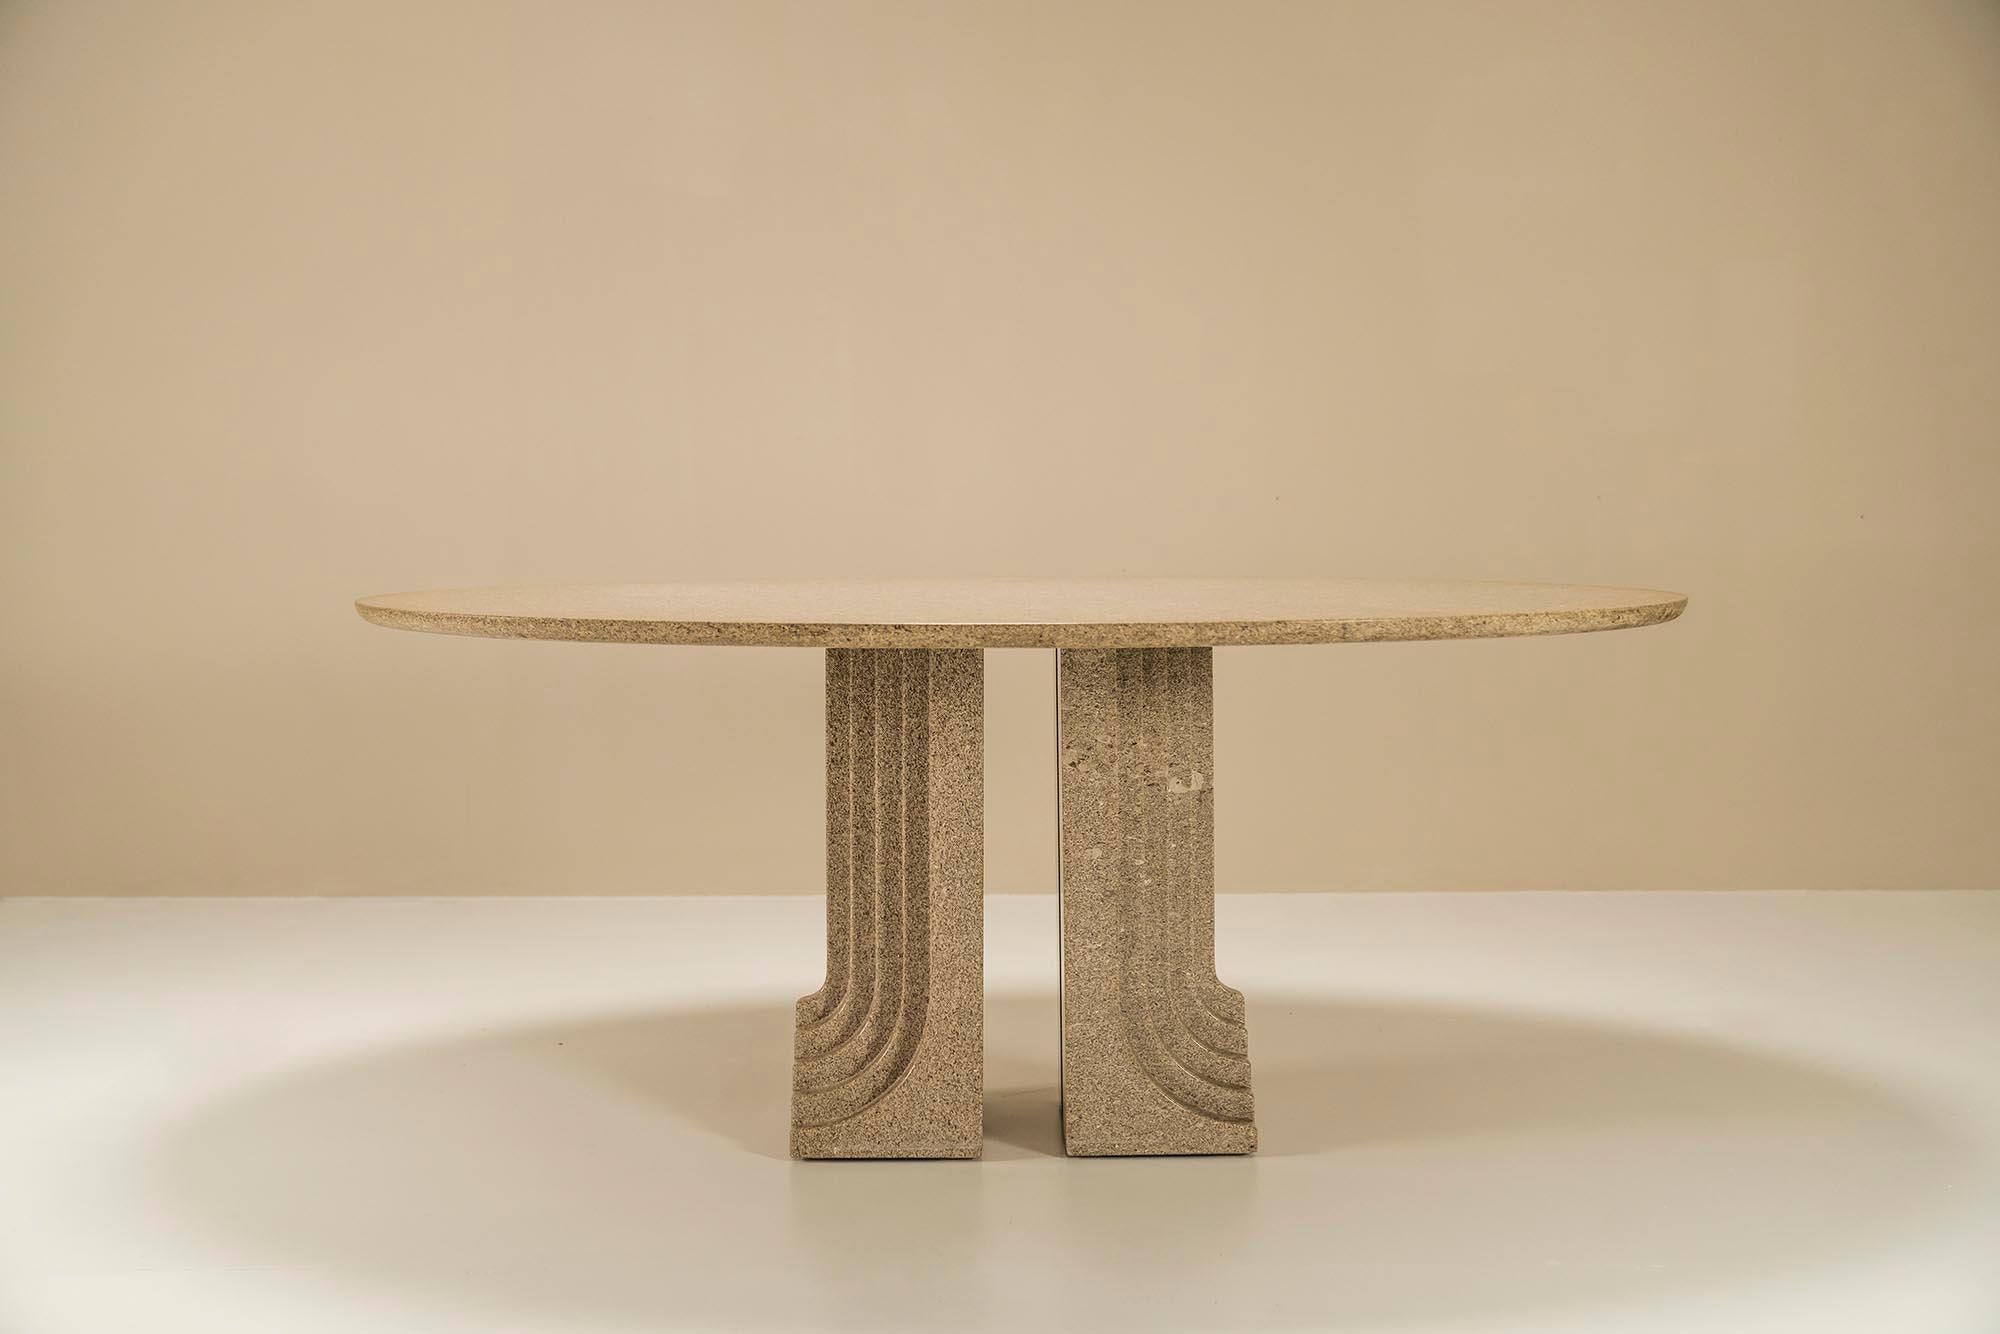 This Italian dining table from the 1970s exudes timeless elegance and beauty. It was designed by perhaps one of the prominent Italian modernist designers of the last century. What immediately catches the eye with this table are the architectural